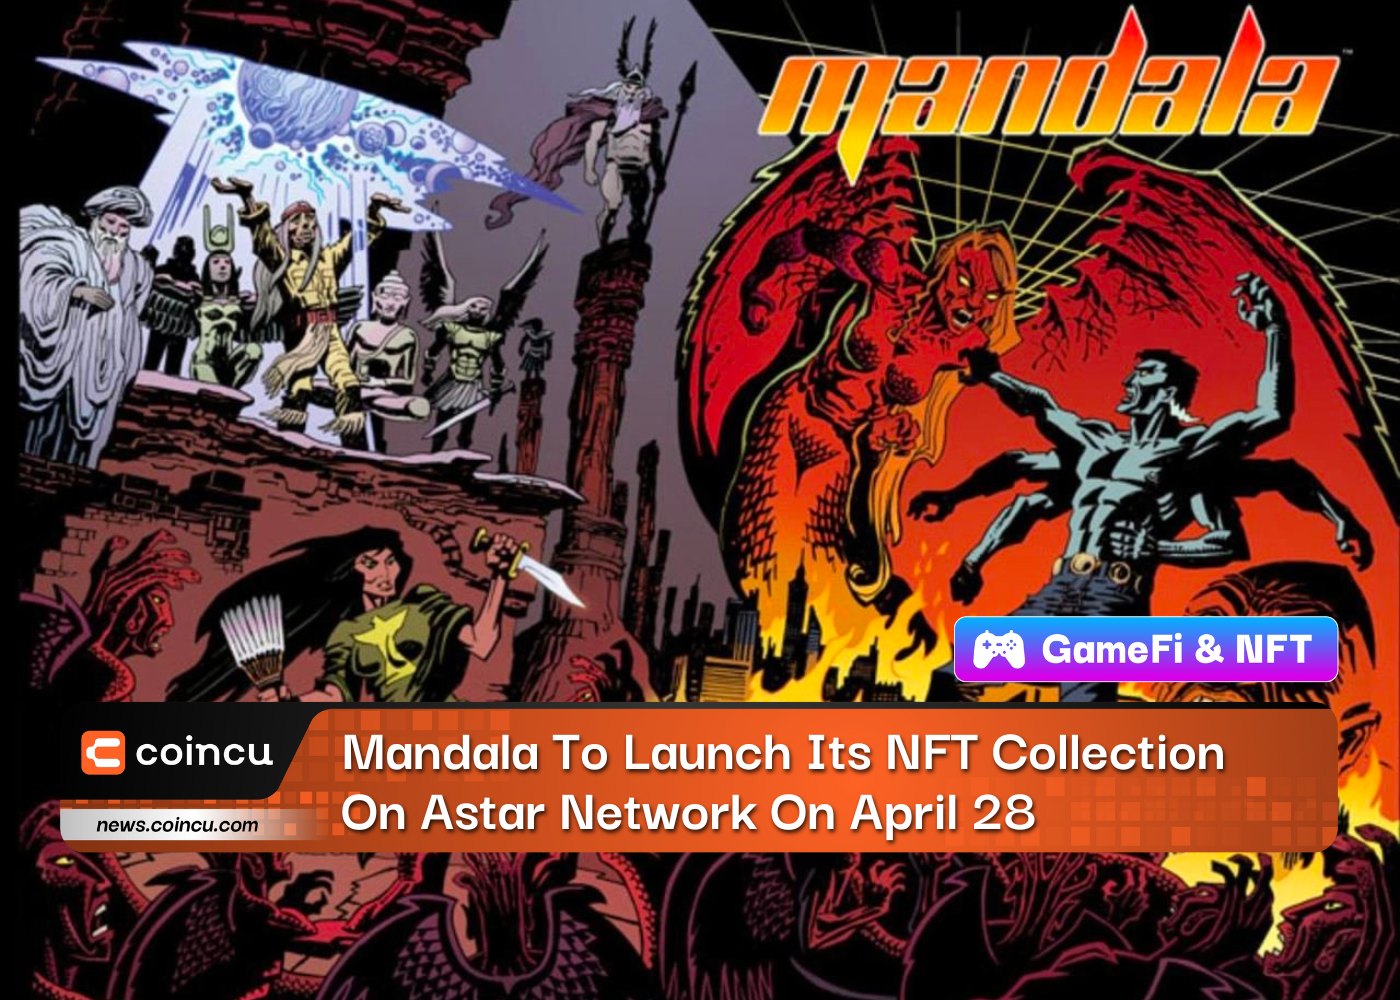 Mandala To Launch Its NFT Collection On Astar Network On April 28